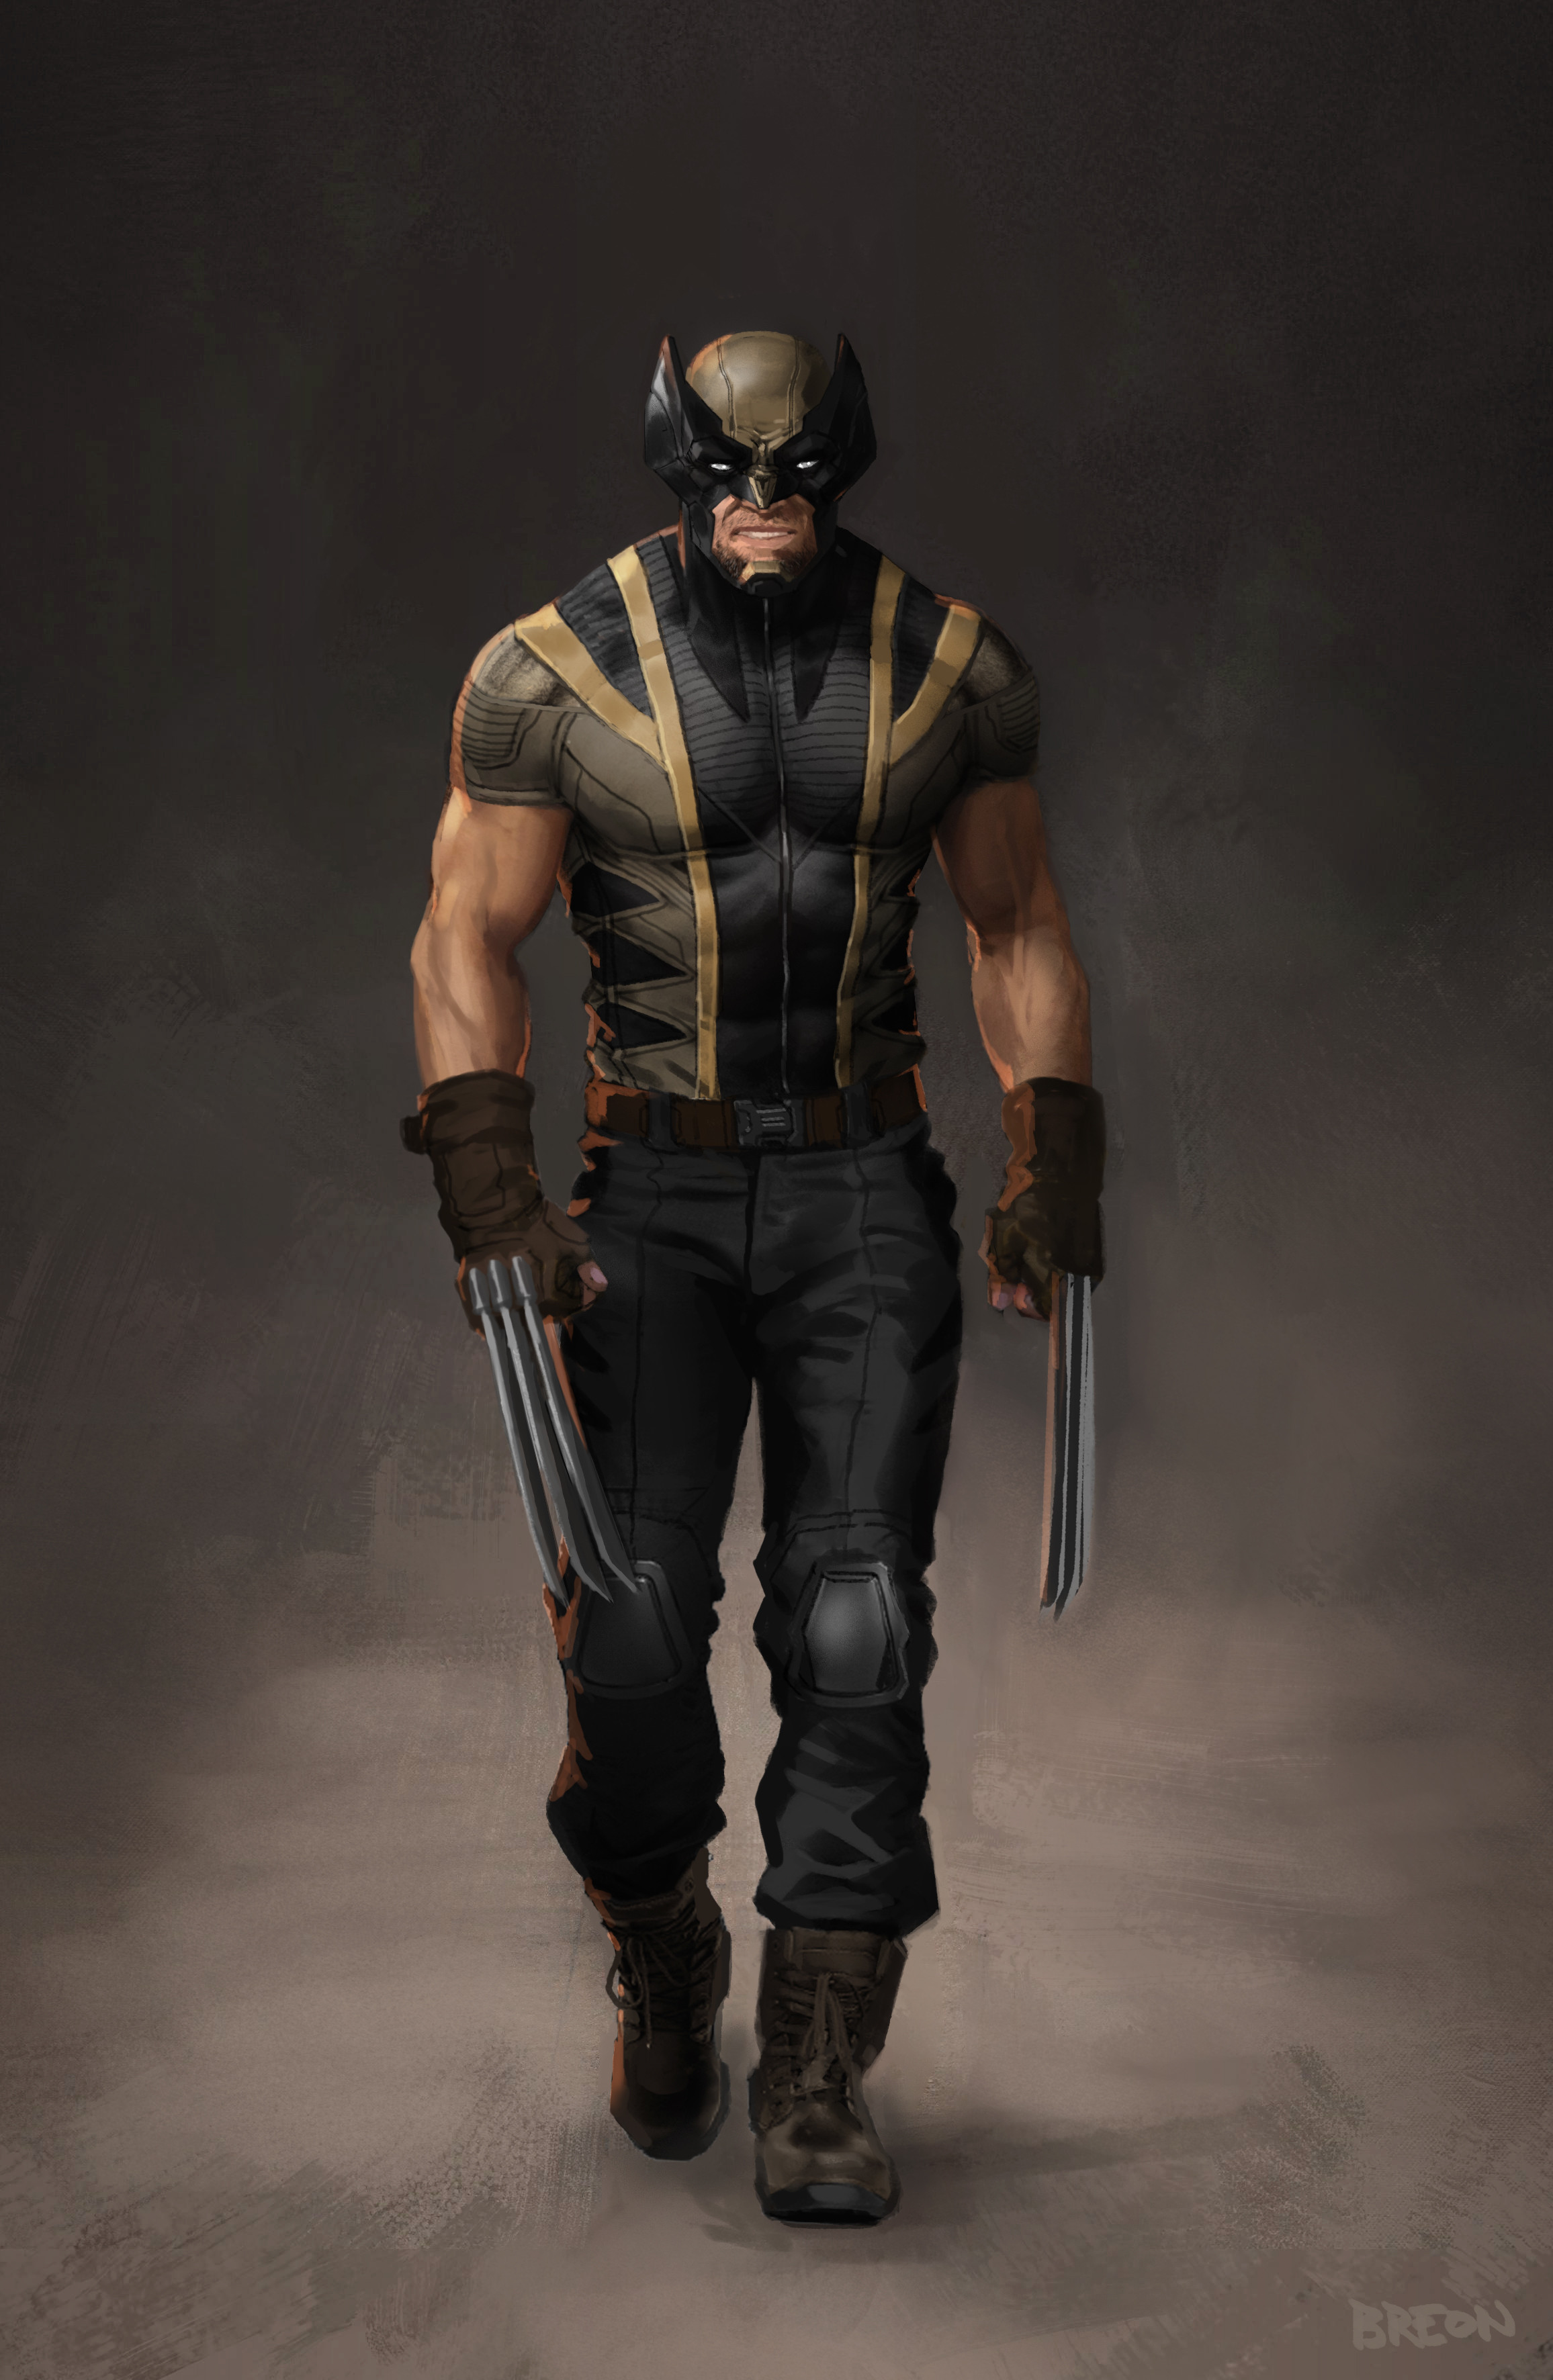 Wolverine redesign for the MCU.